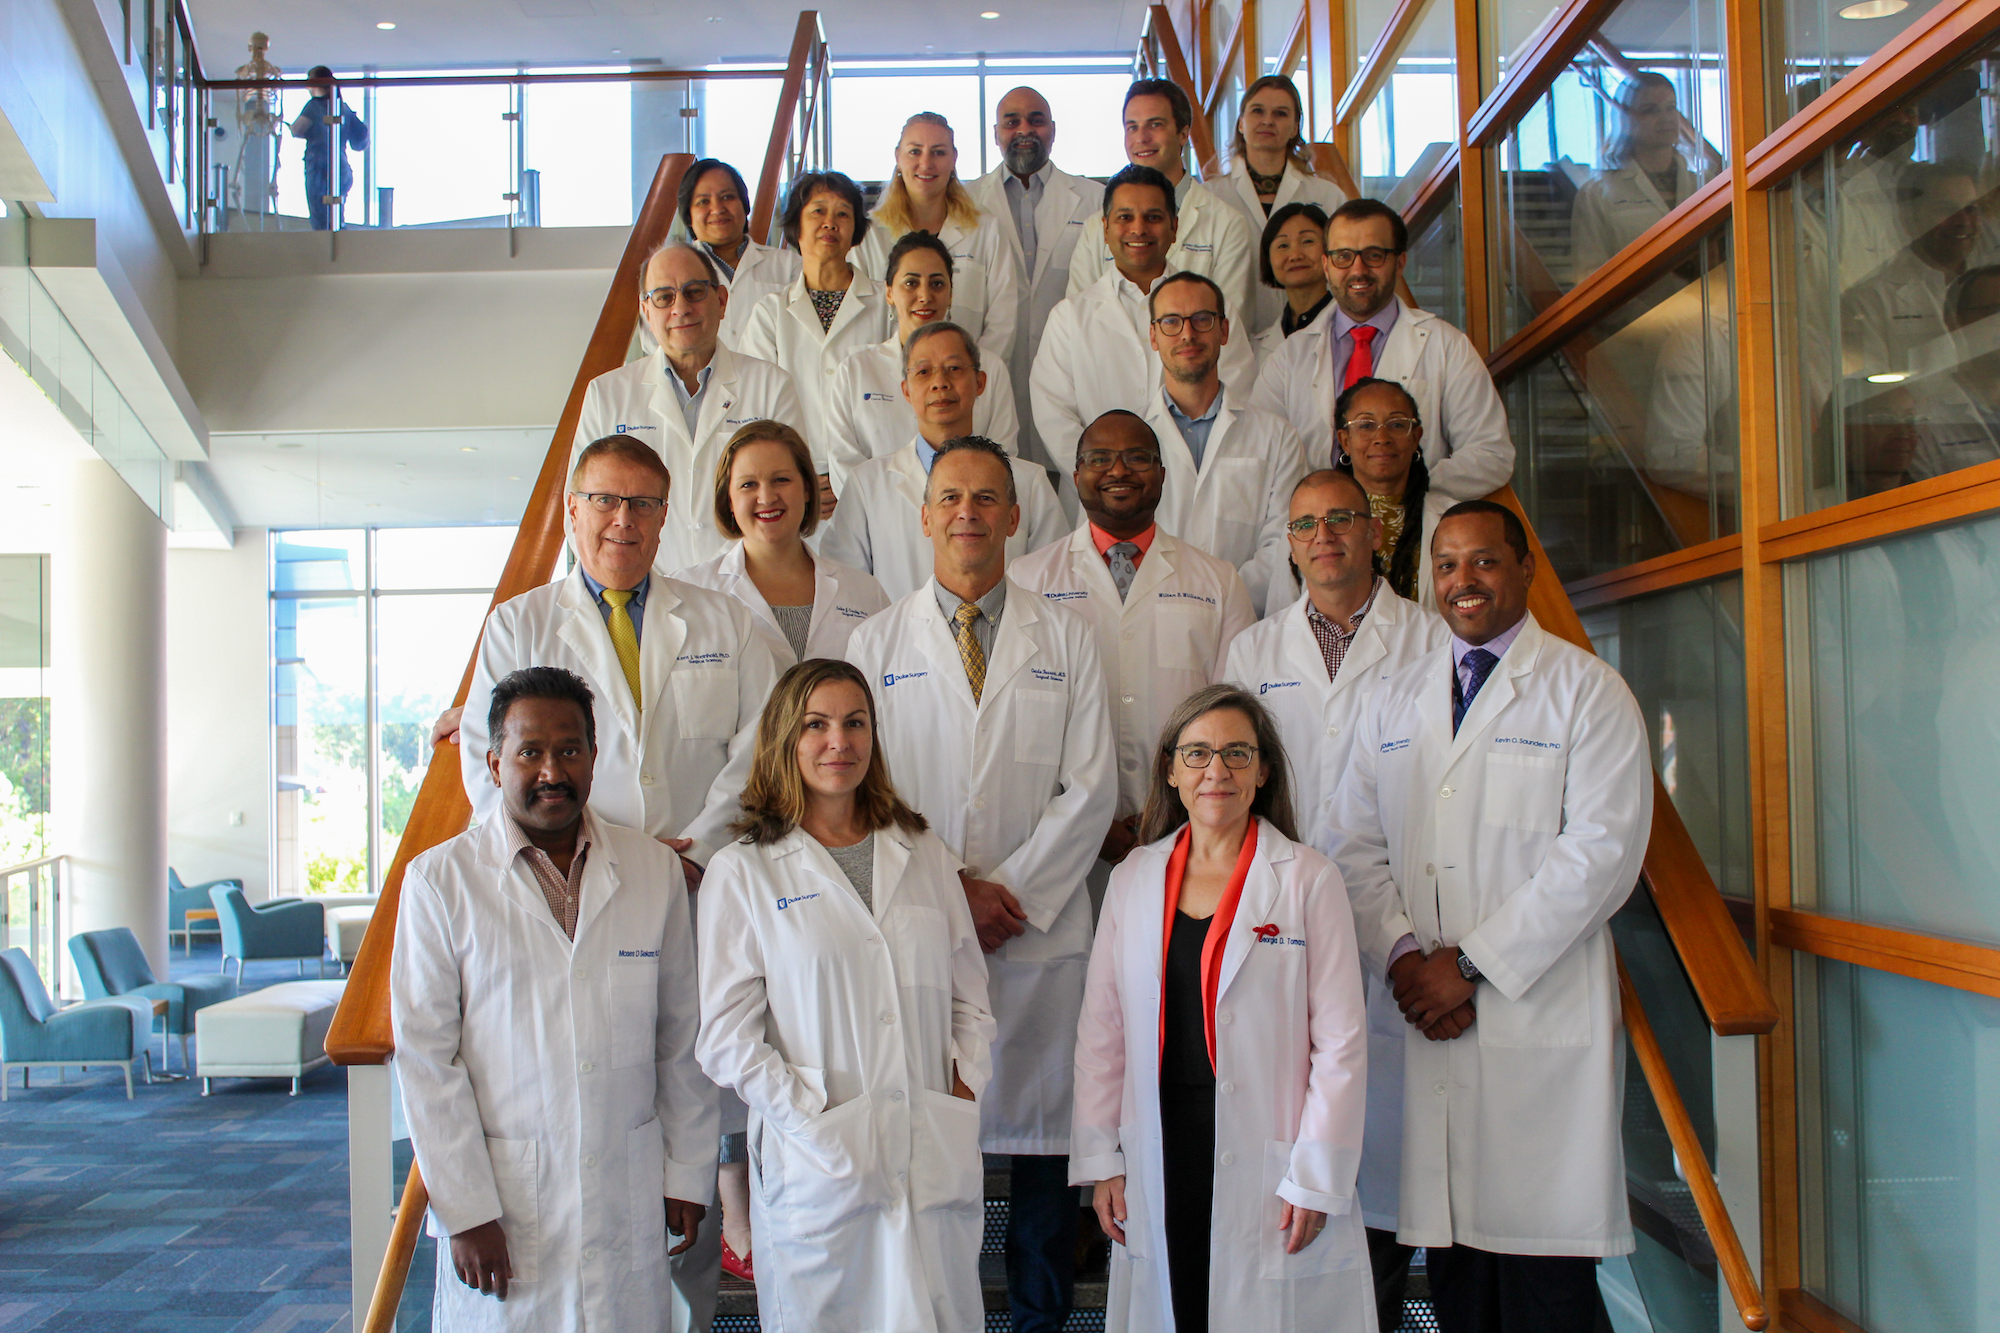 Division of Surgical Sciences faculty stand for a group photo in their white coats on the stairs of Trent Semans Center